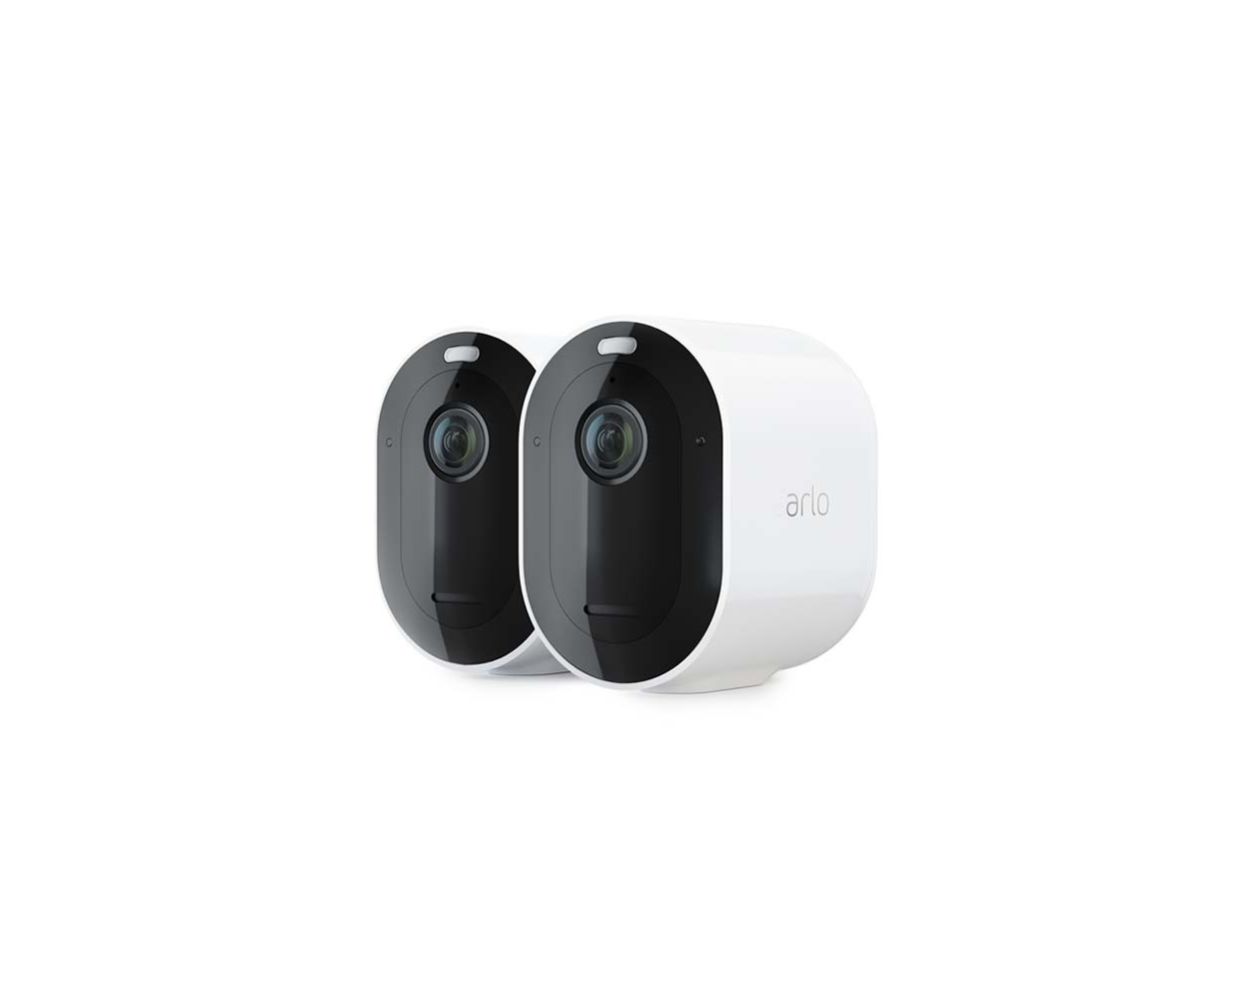 Arlo pro 3 pack indoor outdoor hd surveillance smart lights Buy Arlo Pro 3 Vms4240p 100aus 2k Video With Hdr Wire Free Security Camera System 2 Camera System Online Wireless 1 Wireless 1